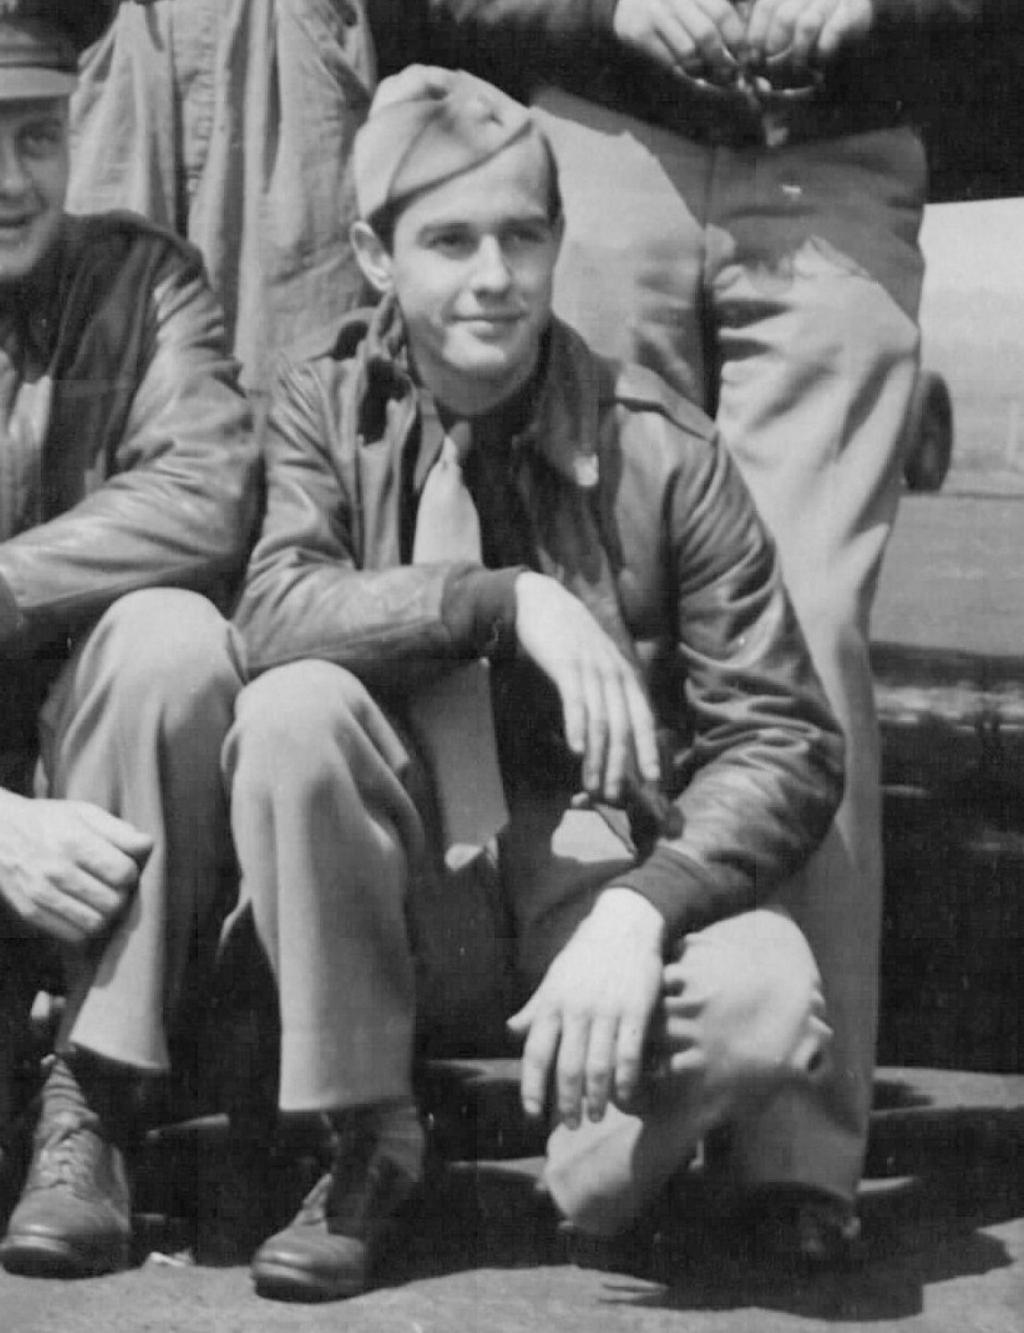 THE 91er WHO WAS SHOT DOWN TWICE German fighter pilots compiled an amazing number of victories because when they were shot down and not seriously injured they would be up in their fighters the next